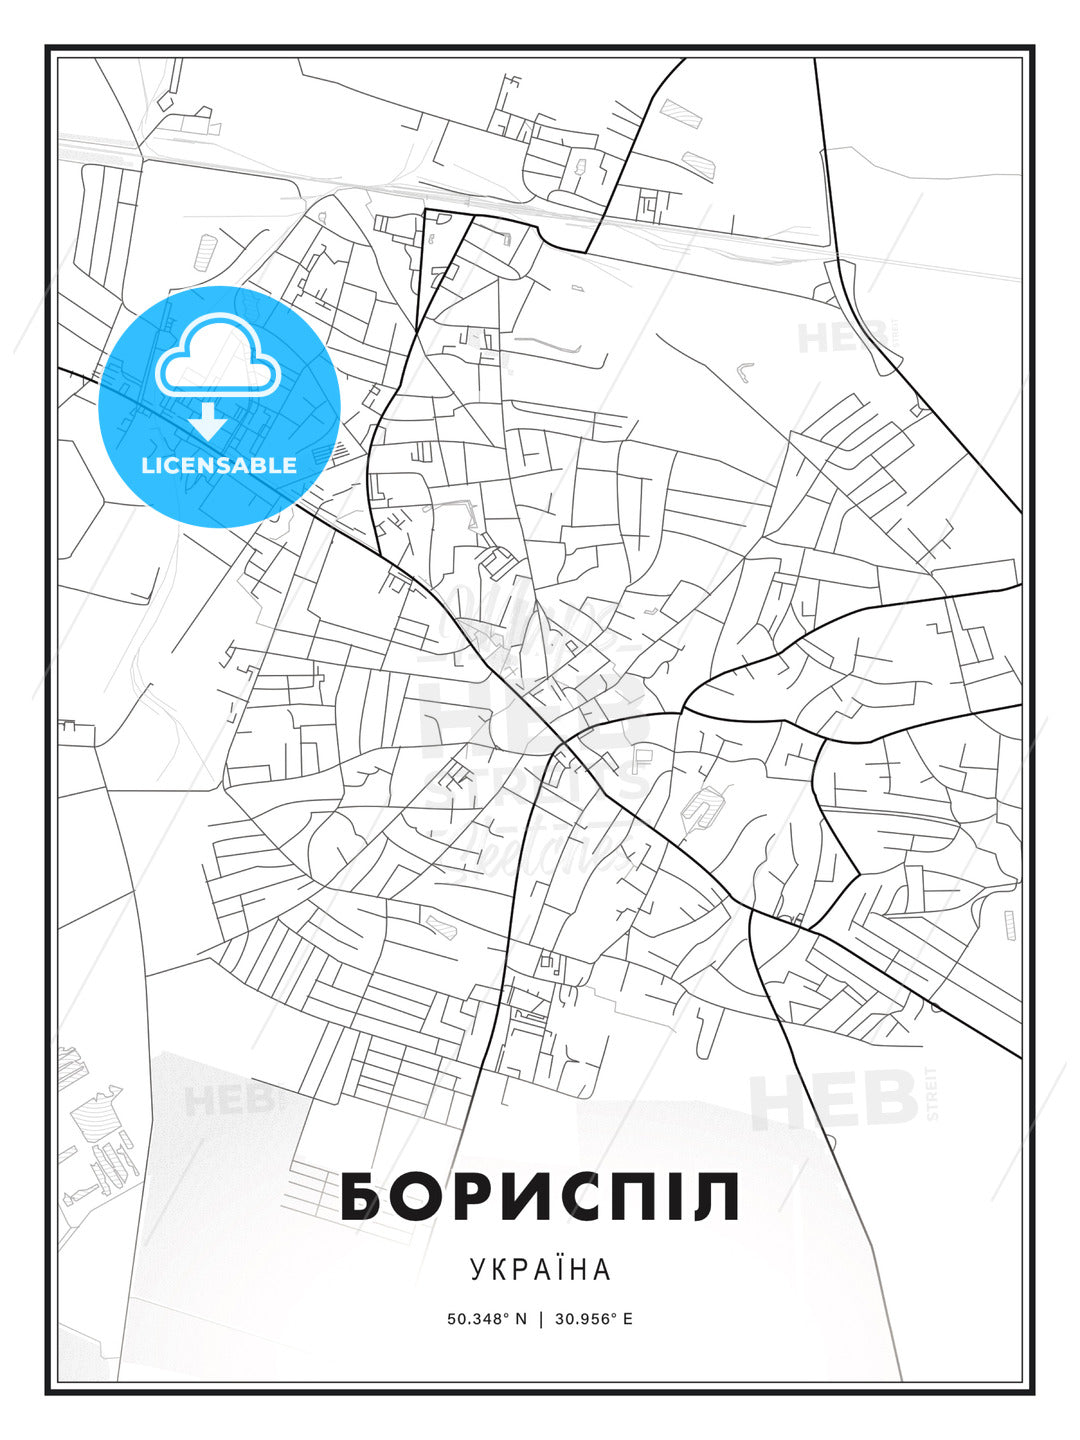 БОРИСПІЛ / Boryspil, Ukraine, Modern Print Template in Various Formats - HEBSTREITS Sketches